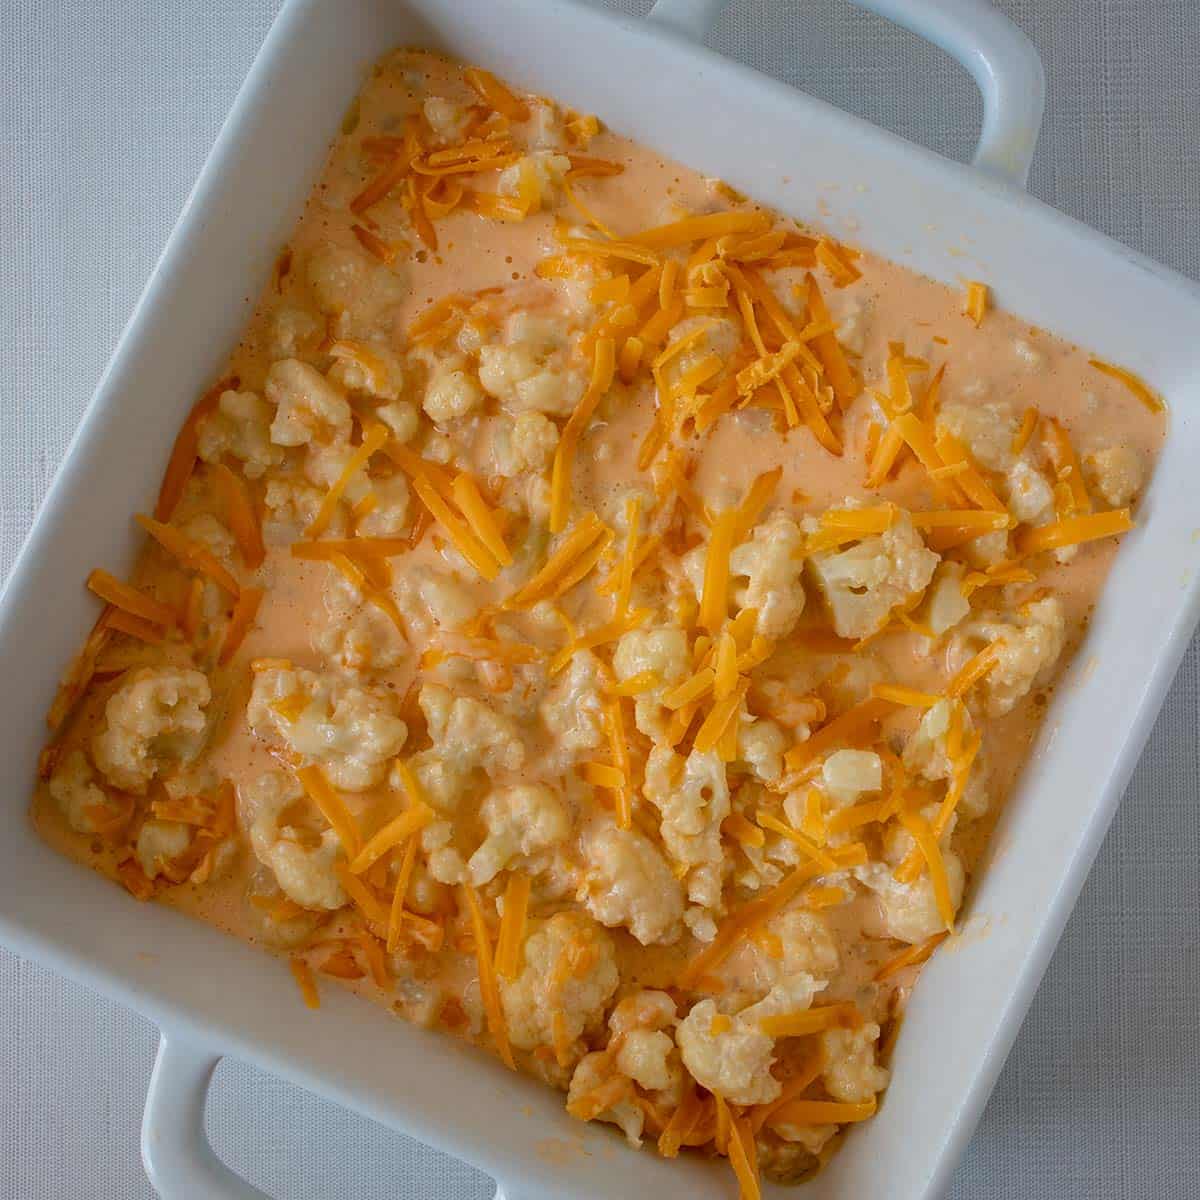 cauliflower mac and cheese mixture poured into casserole pan and topped with additional cheese prior to baking.